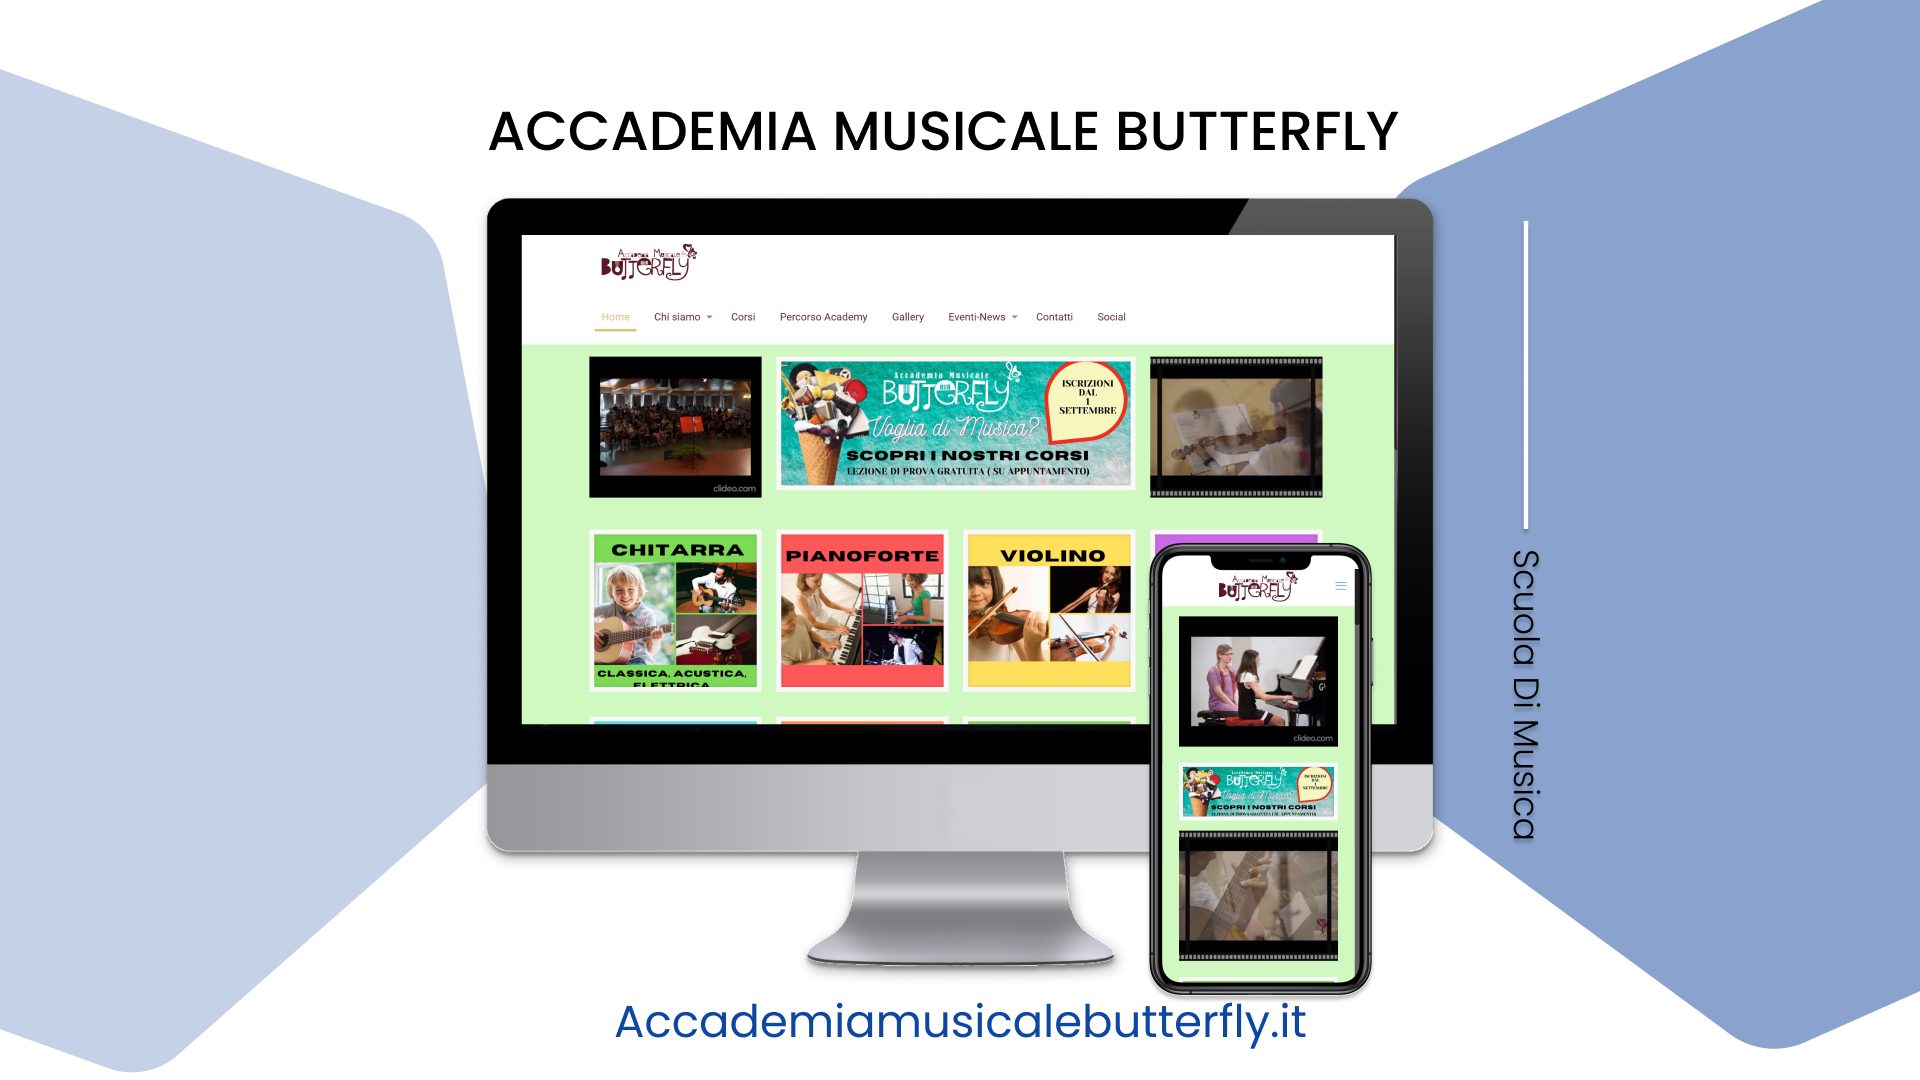 Accademia Musicale Butterfly